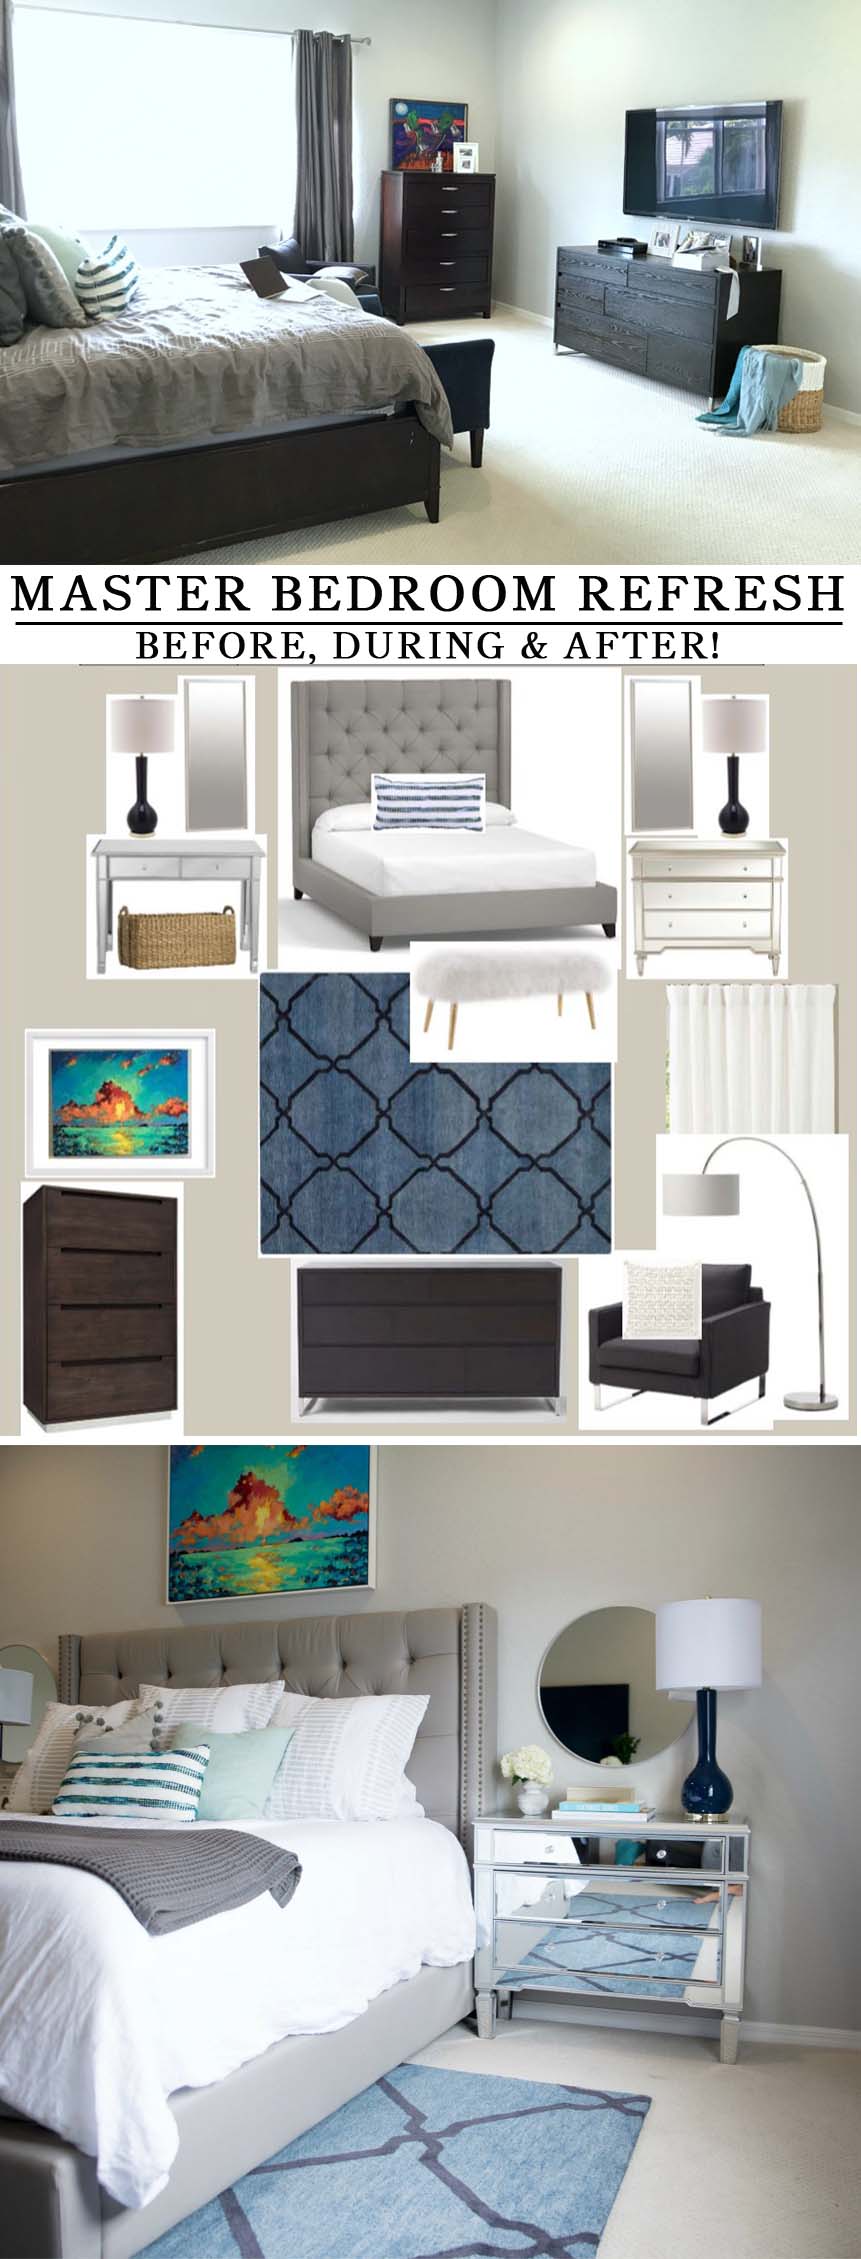 Master Bedroom Before & After -- Coastal, contemporary inspired space - Master bedroom refresh -- bright and light master bedroom decor (before & after) with grey upholstered headboard by popular Florida style blogger The Modern Savvy